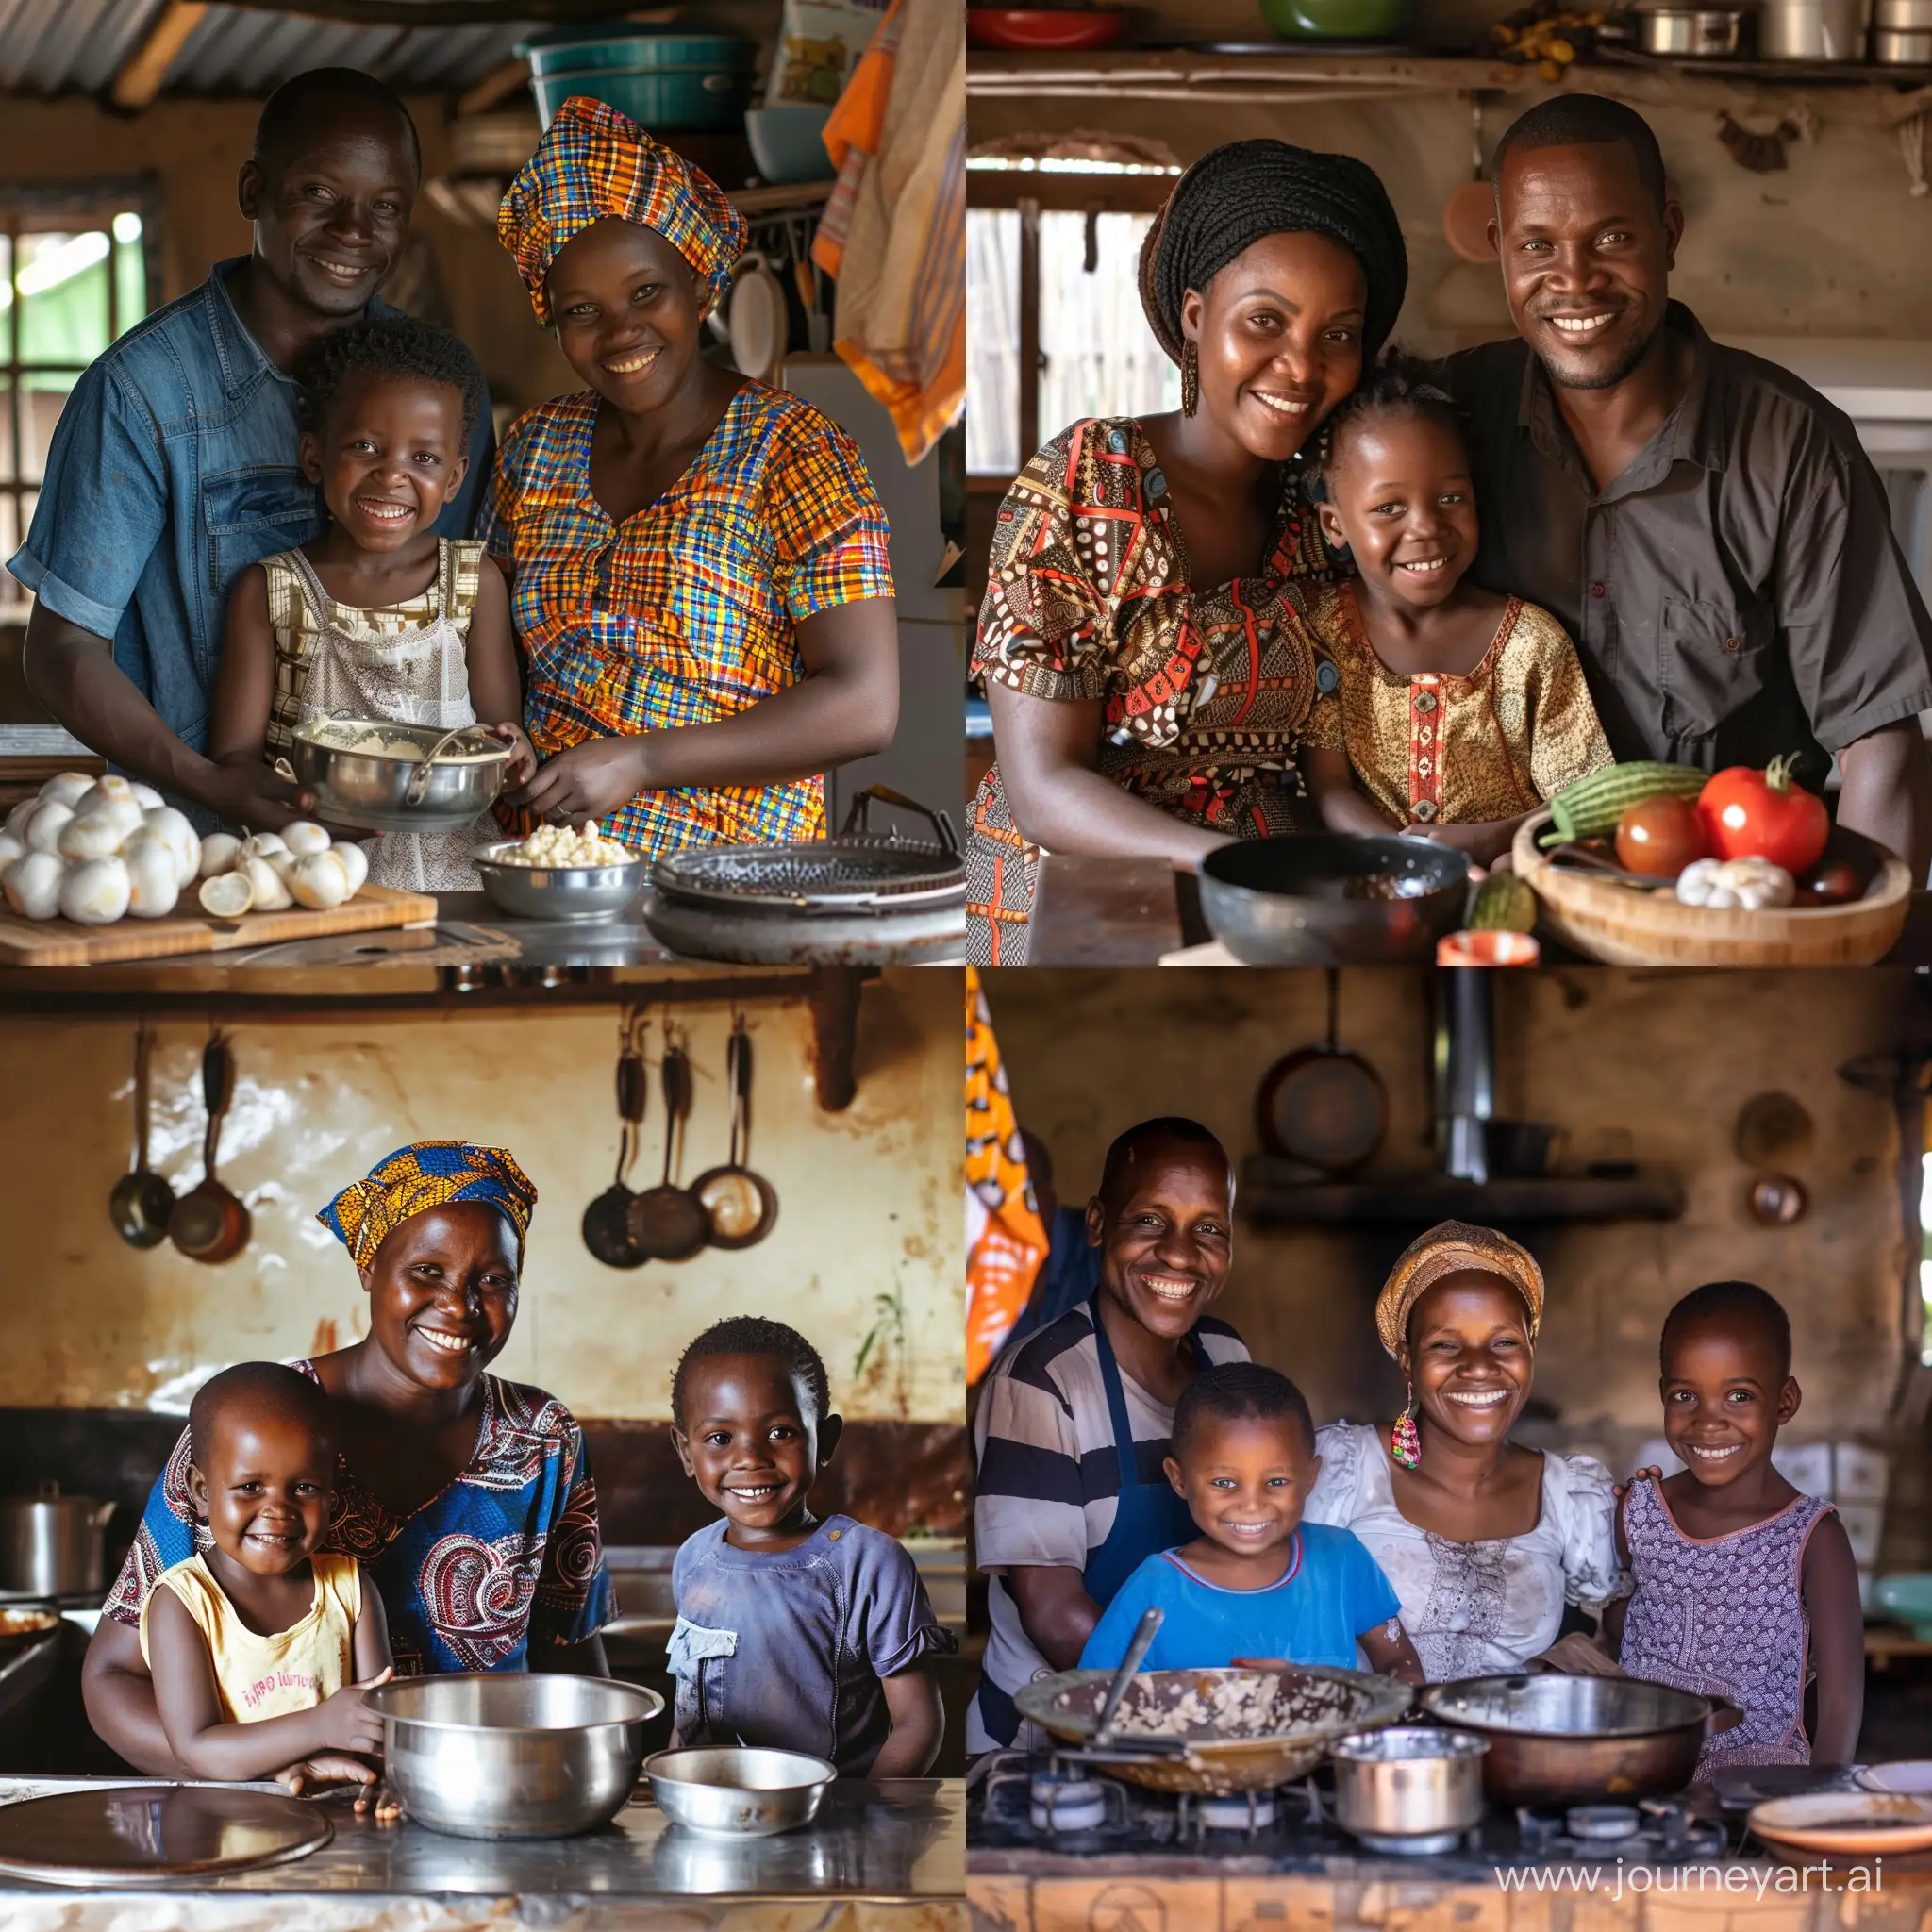 Joyful-African-Family-Cooking-Together-in-Bright-Kitchen-Scene